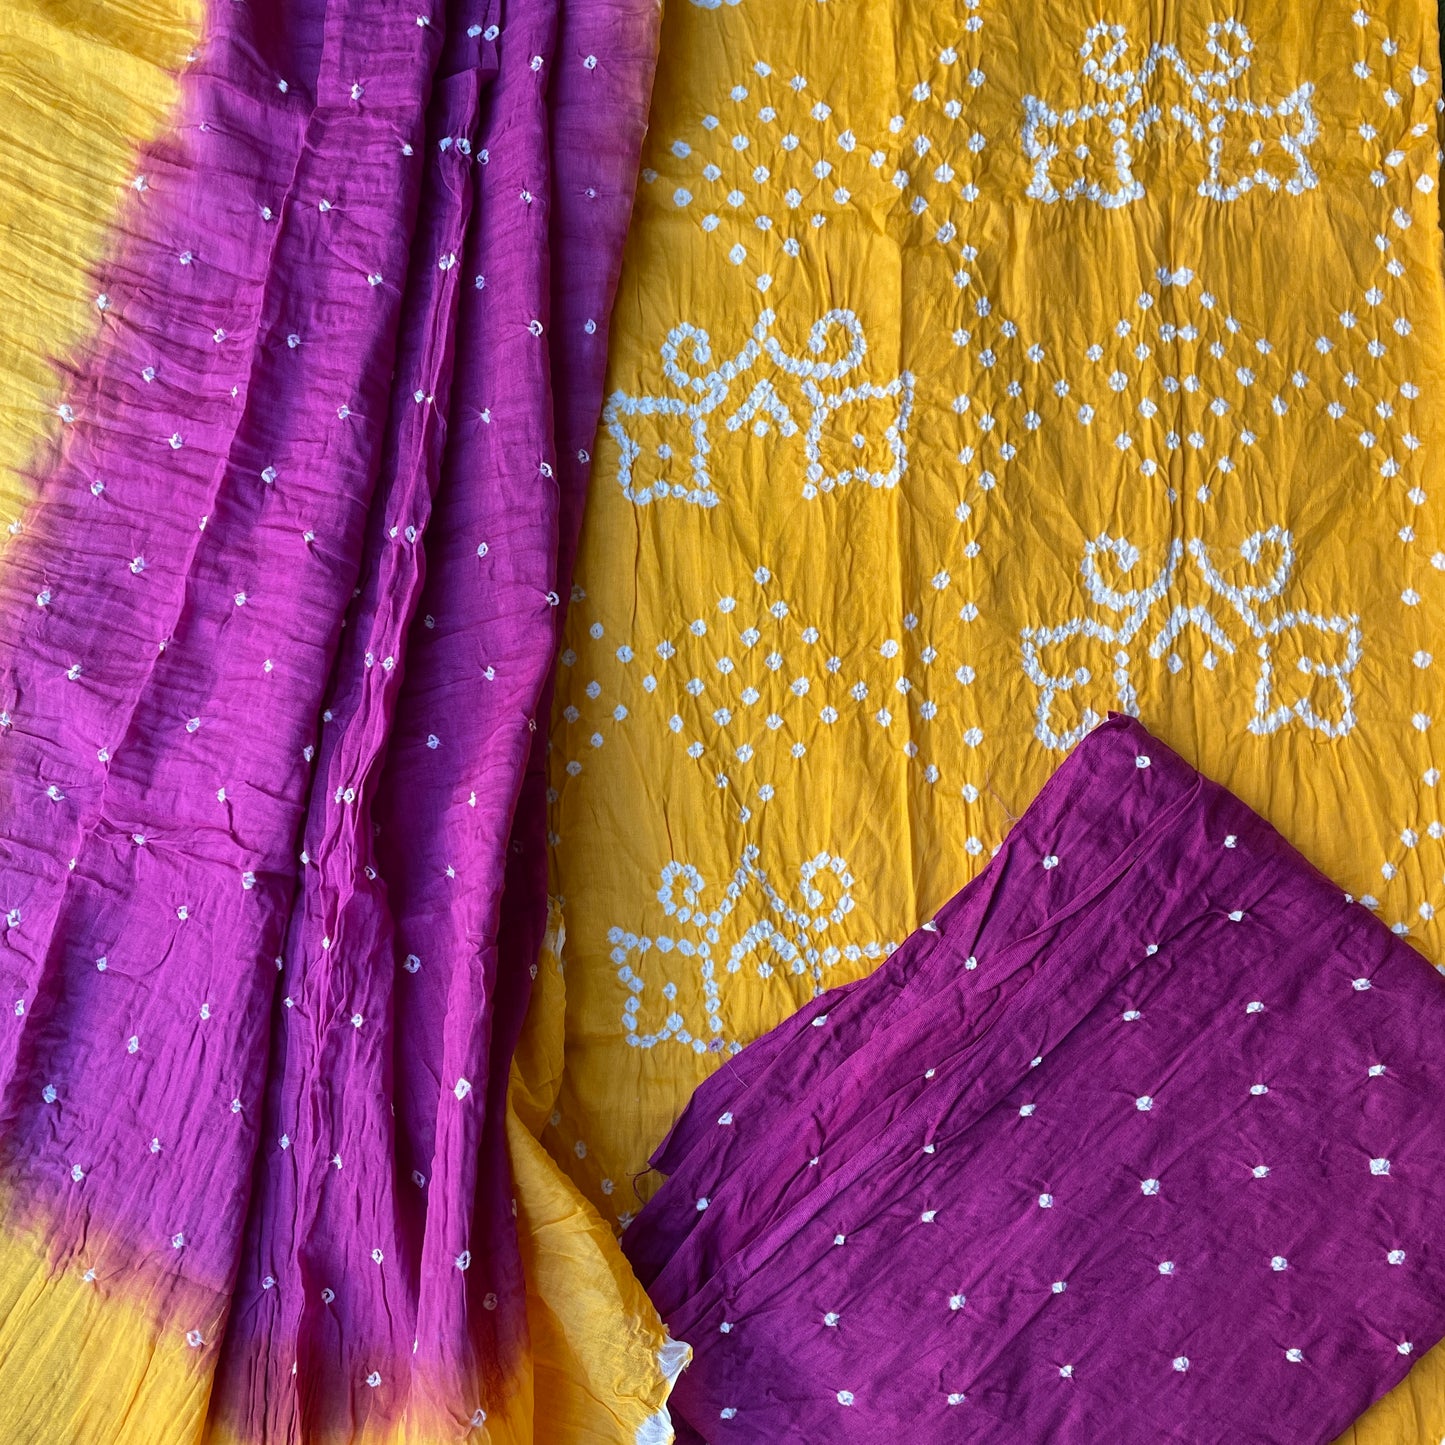 Hand Tied Bandhani Pure Soft Cotton Unstitched Salwar Suit Fabric - Yellow and Magenta